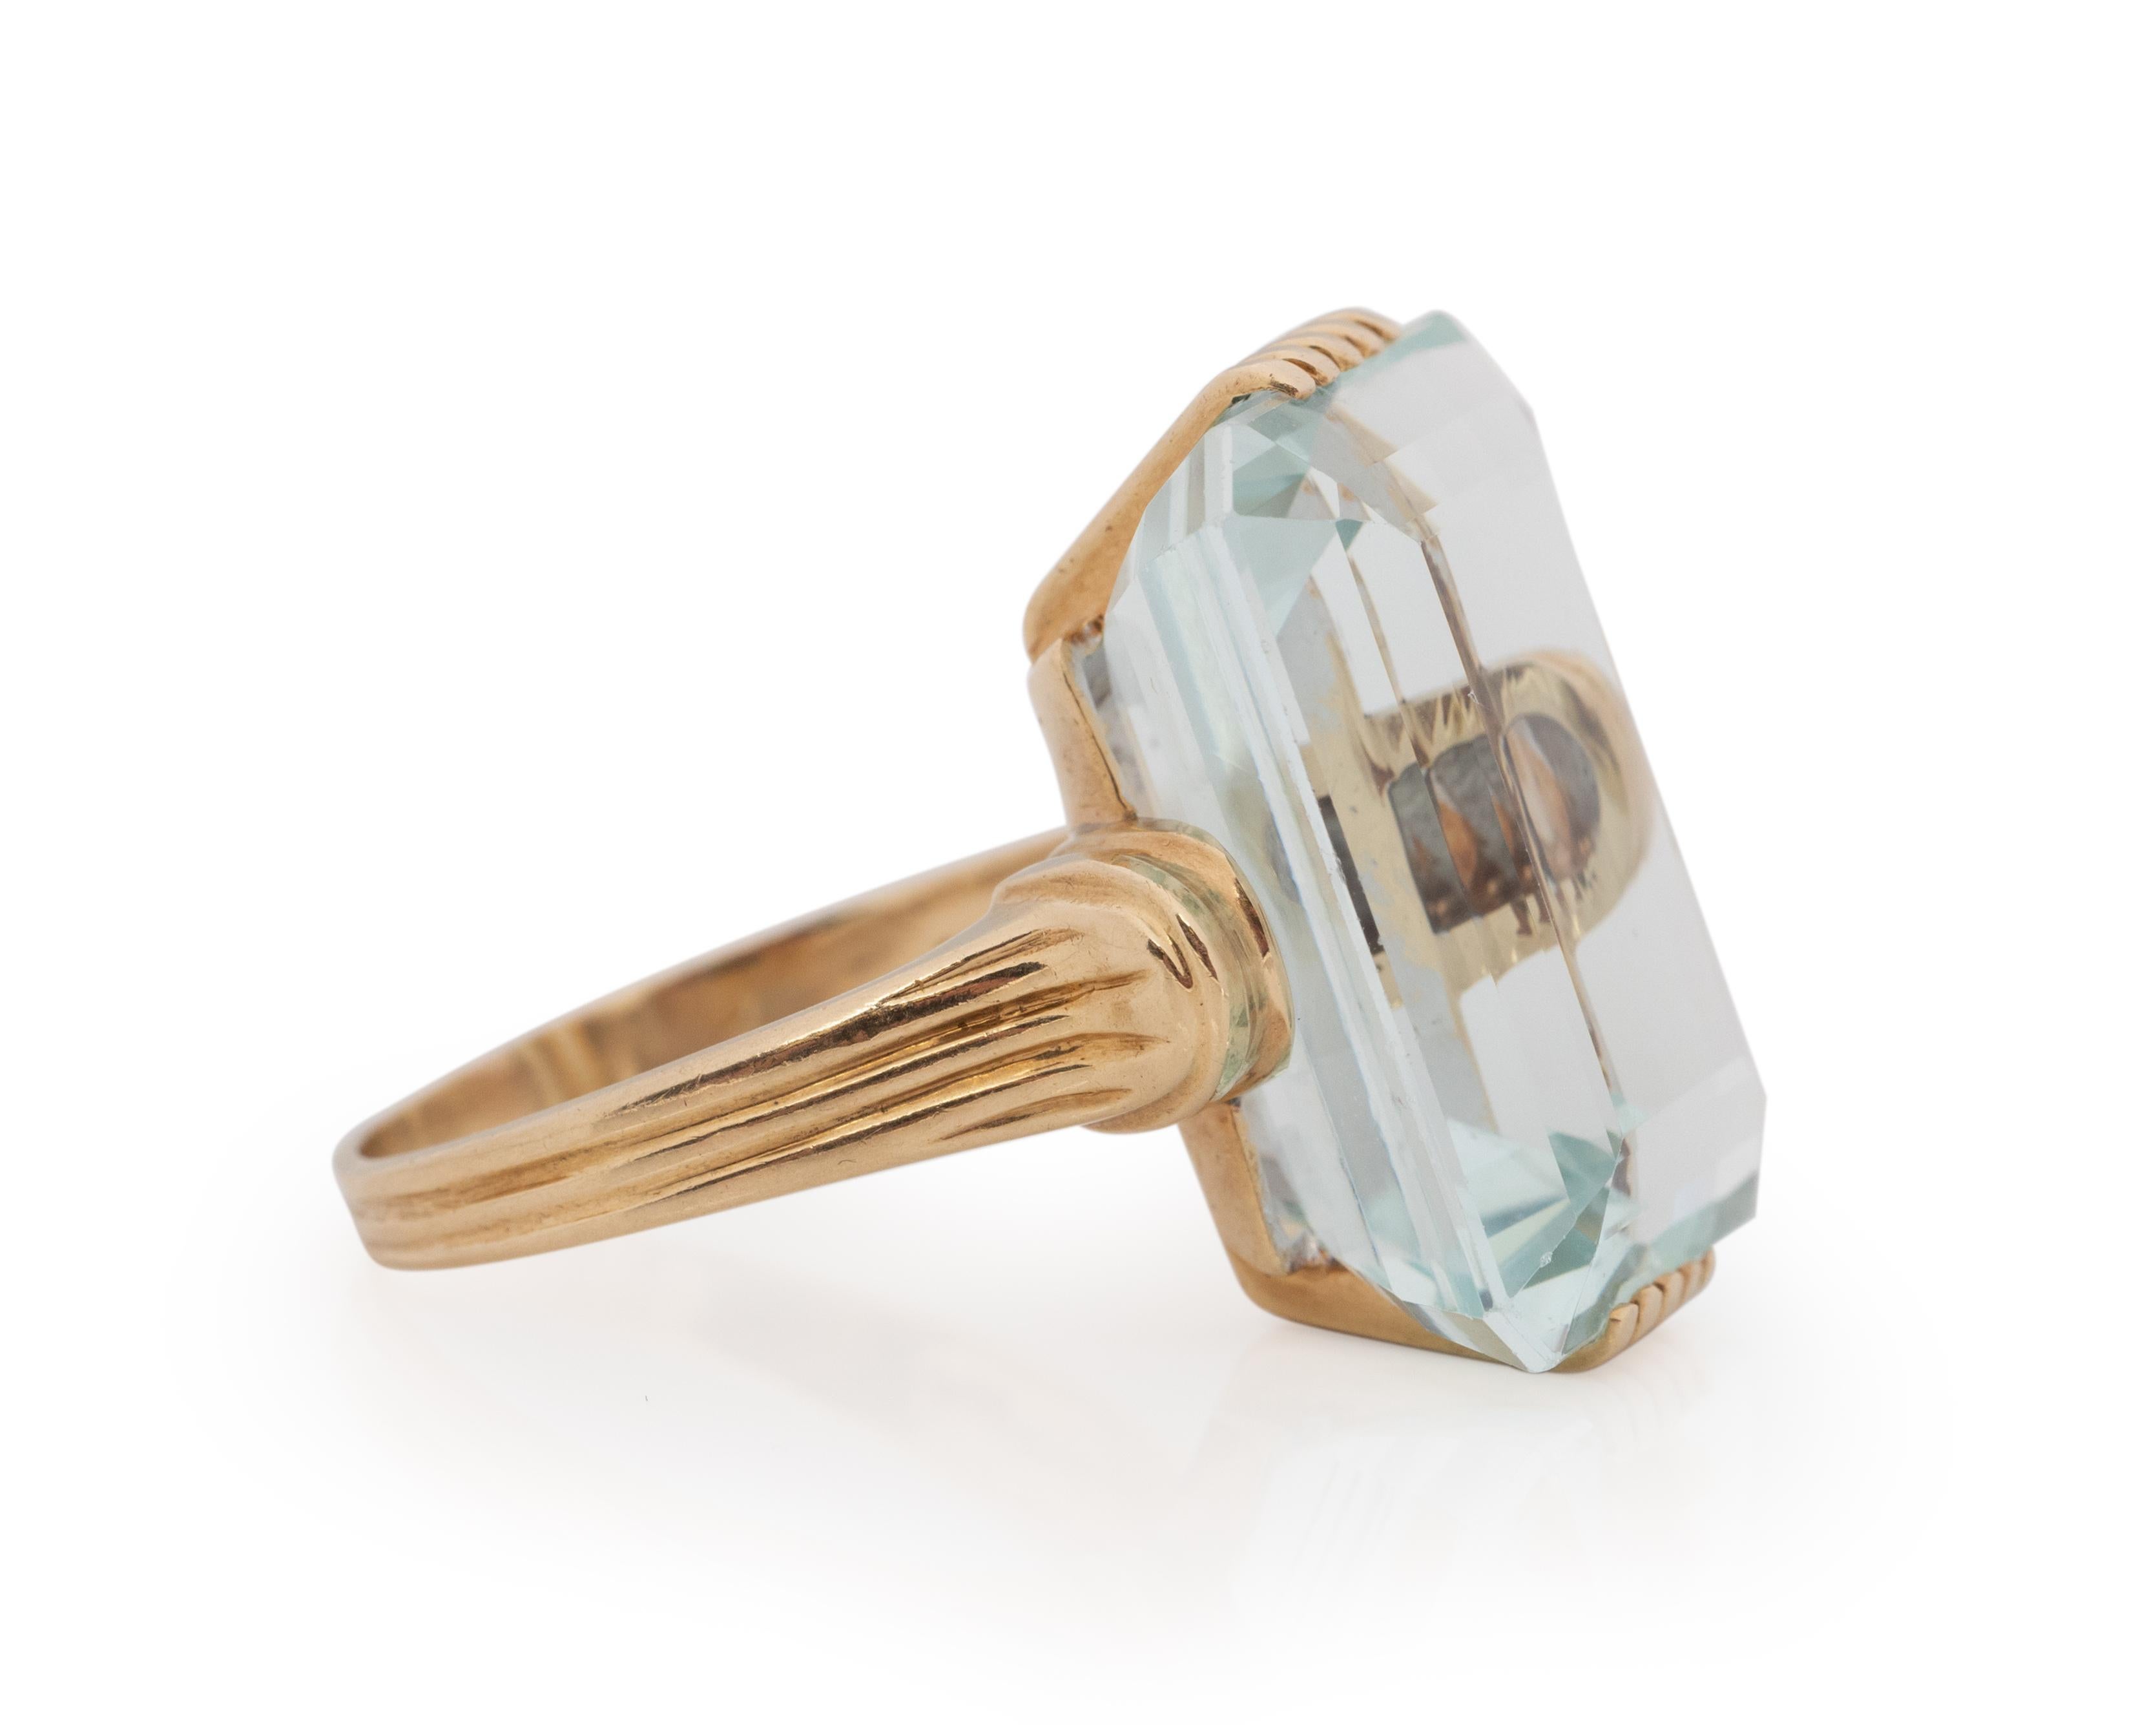 Ring Size: 9
Metal Type: 14K Yellow Gold [Hallmarked, and Tested]
Weight: 12.8 grams

Center Aquamarine Details:
GIA REPORT #:
Weight: 25.00ct
Cut: Emerald Cut
Color: Blue

Finger to Top of Stone Measurement: 15mm
Condition: Excellent